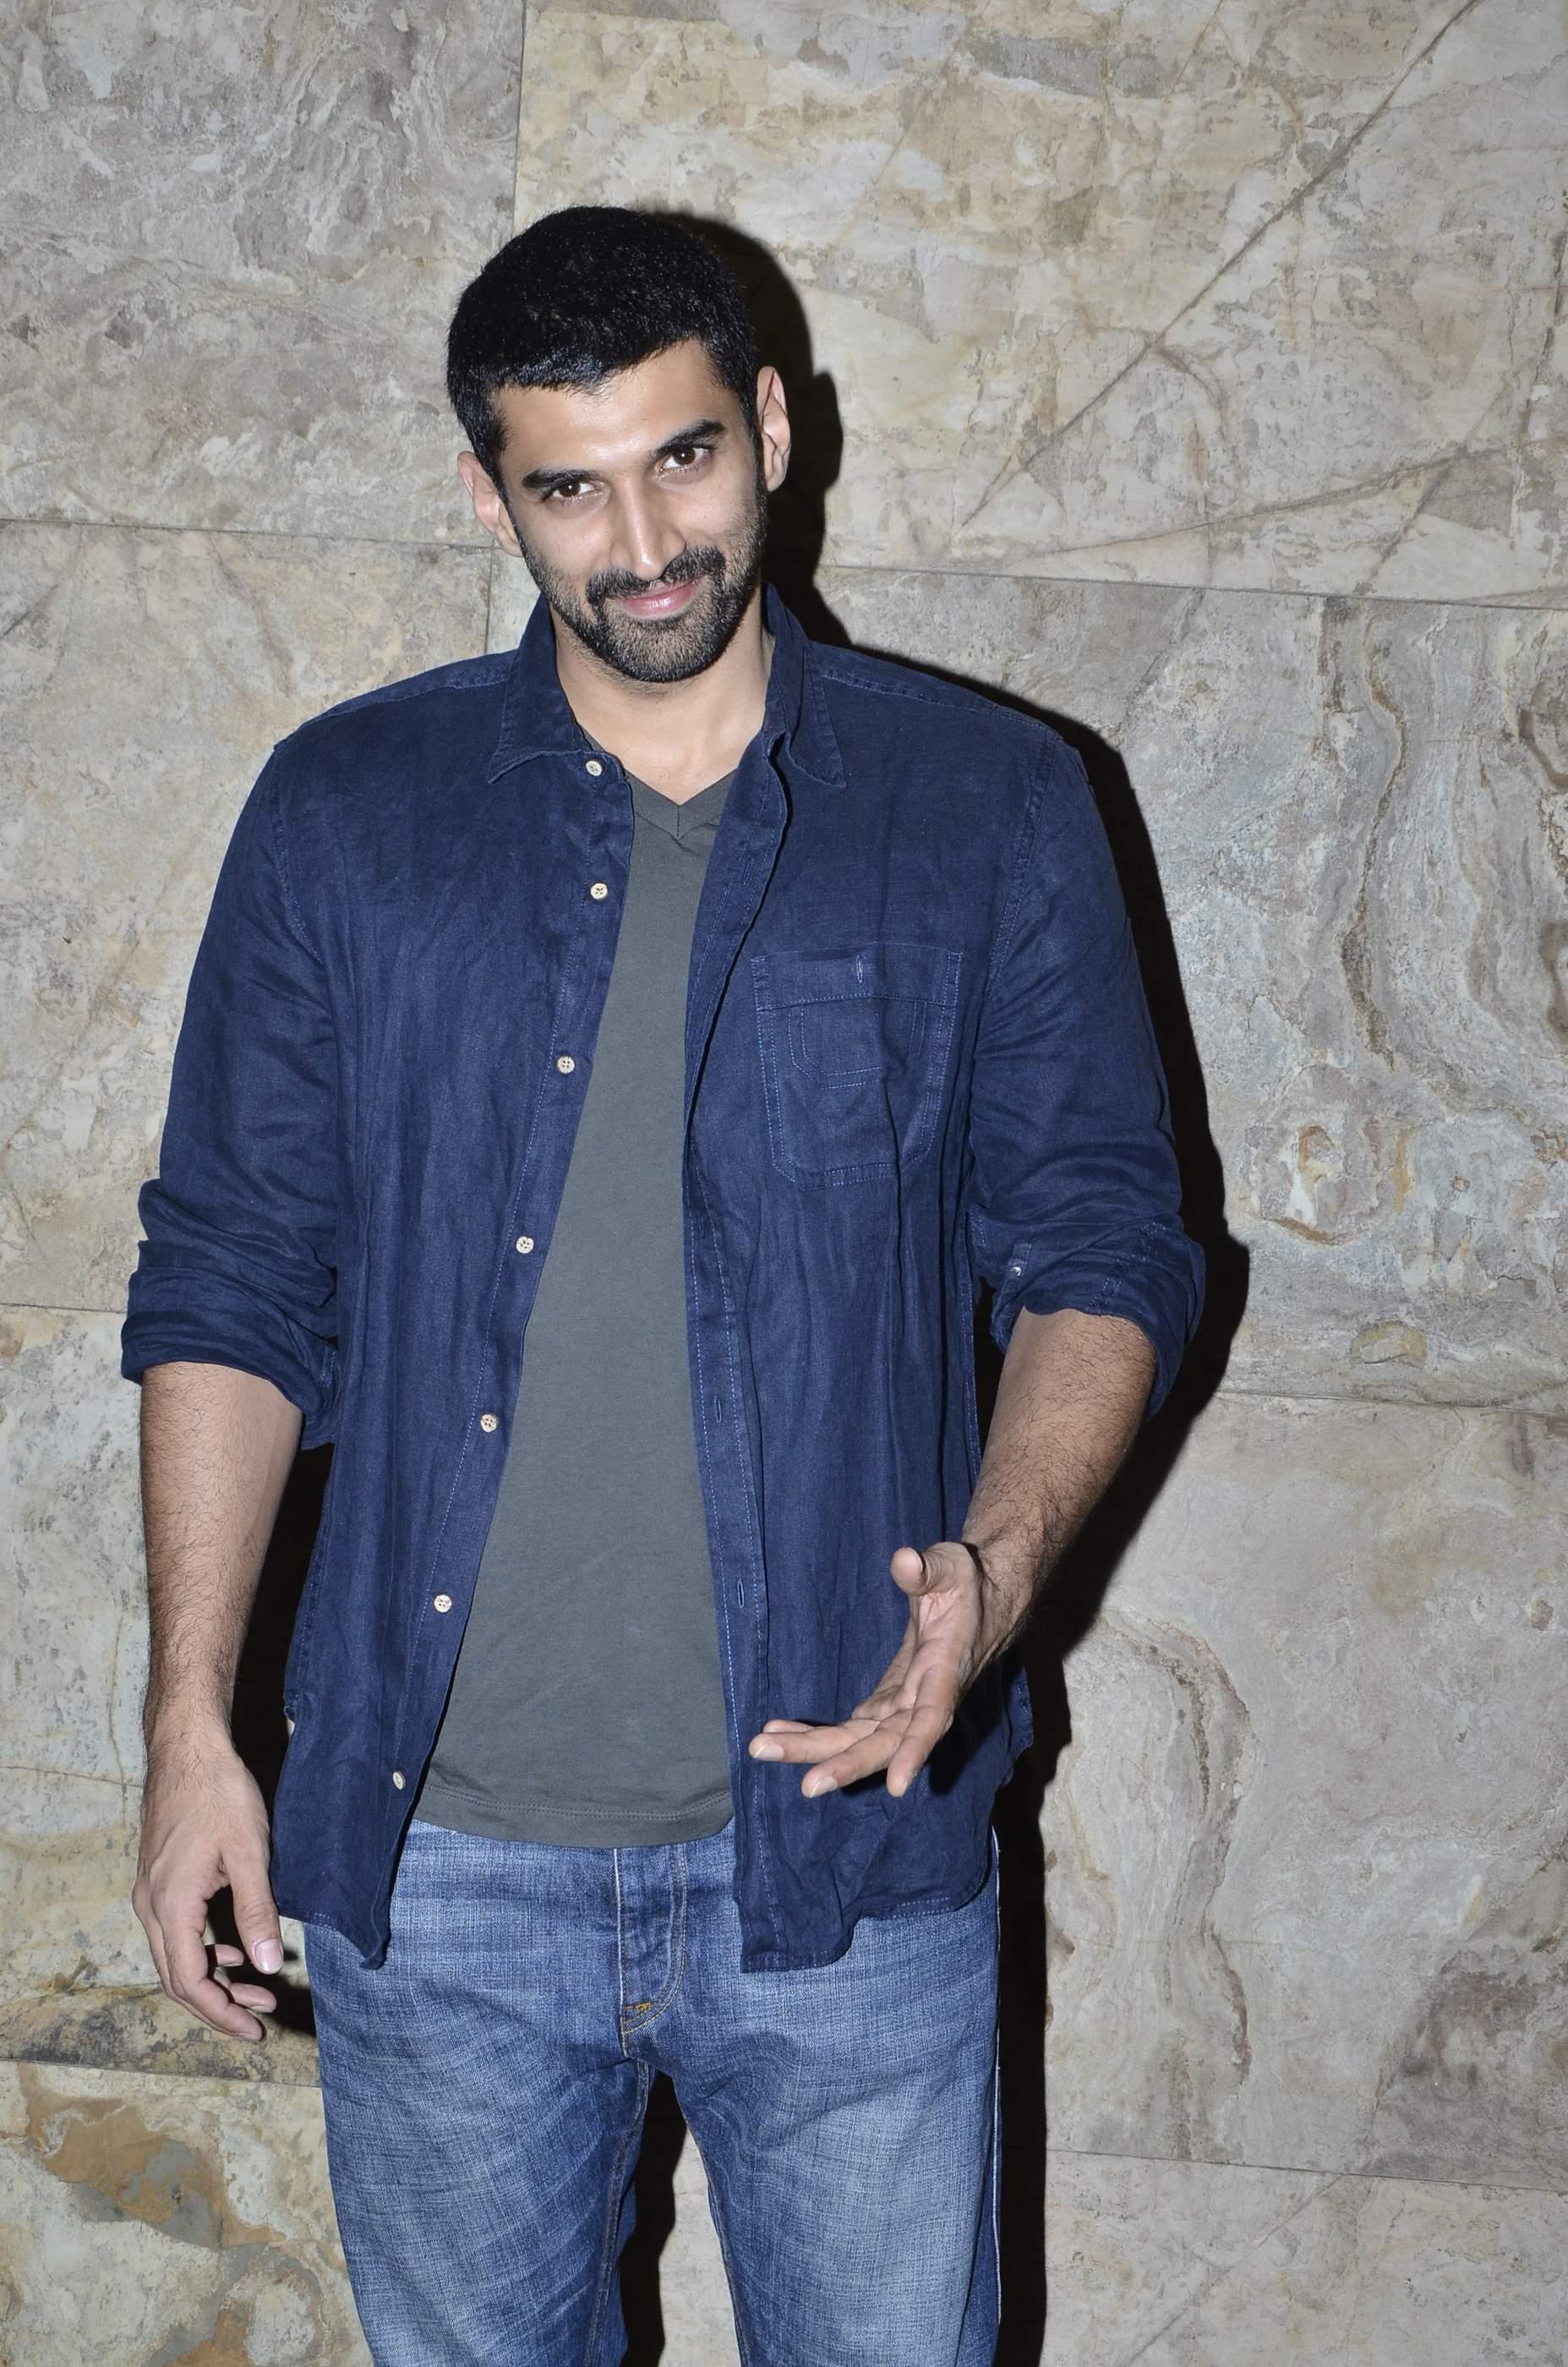 2048x115220 Aditya Roy Kapur Short Hair Style wallpaper 2048x115220  Resolution Wallpaper, HD Celebrities 4K Wallpapers, Images, Photos and  Background - Wallpapers Den